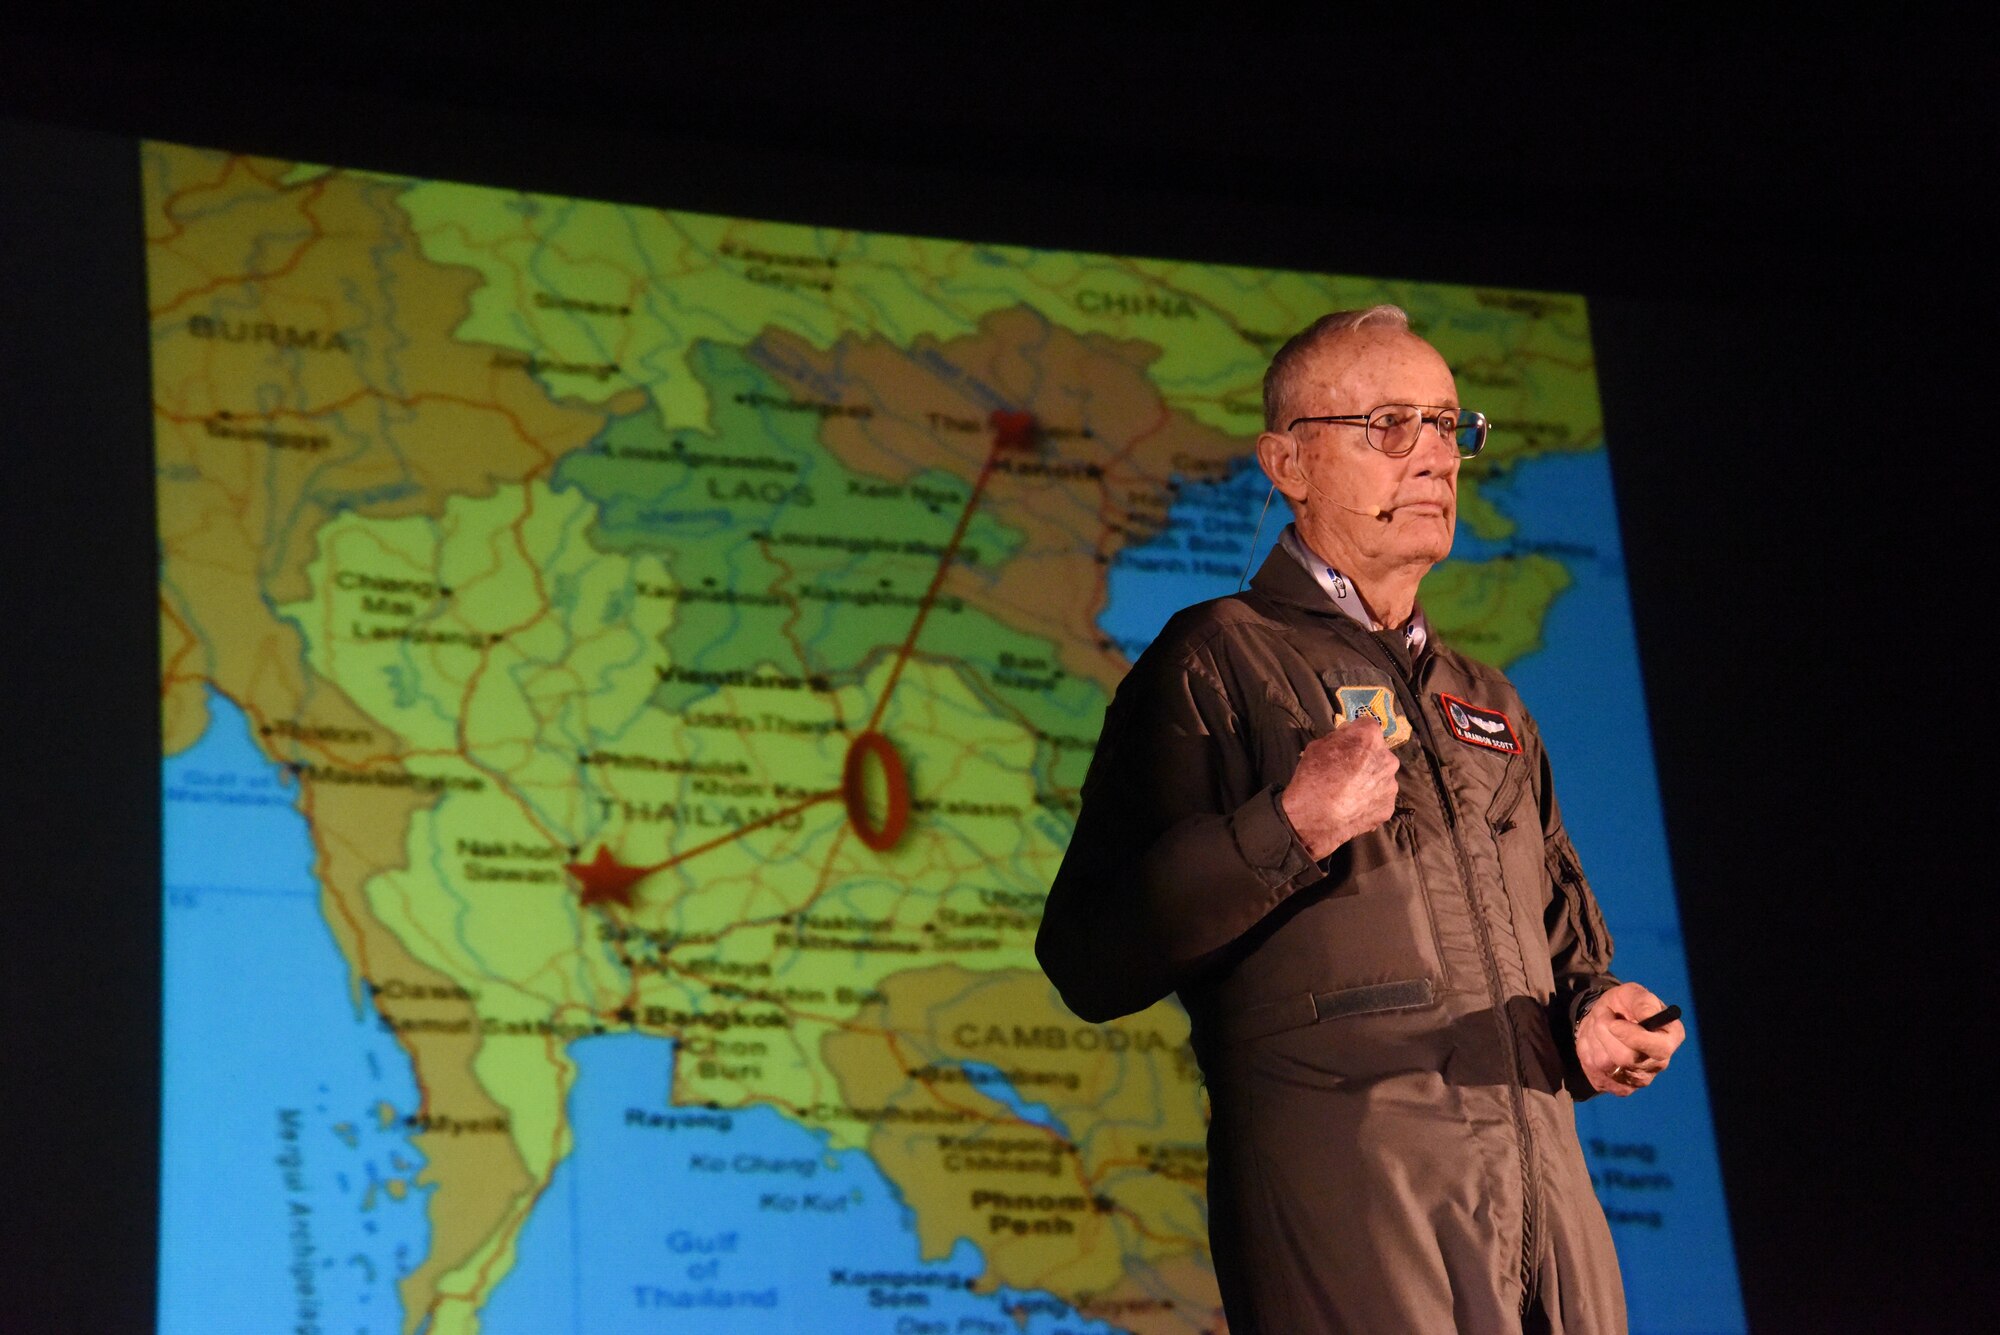 Retired Col. Marty Mahrt speaks about his triumphs and close calls during his time in North Vietnam during the Leaders Inspiring for Tomorrow Summit Apr. 21, 2017, at Fairchild Air Force Base, Washington. The LIFT conference and engagement showcased 18 featured storytellers over a single-day who shared their stories of inspiration, innovation, character and leadership. (U.S. Air Force photo/Tech. Sgt. Travis Edwards)